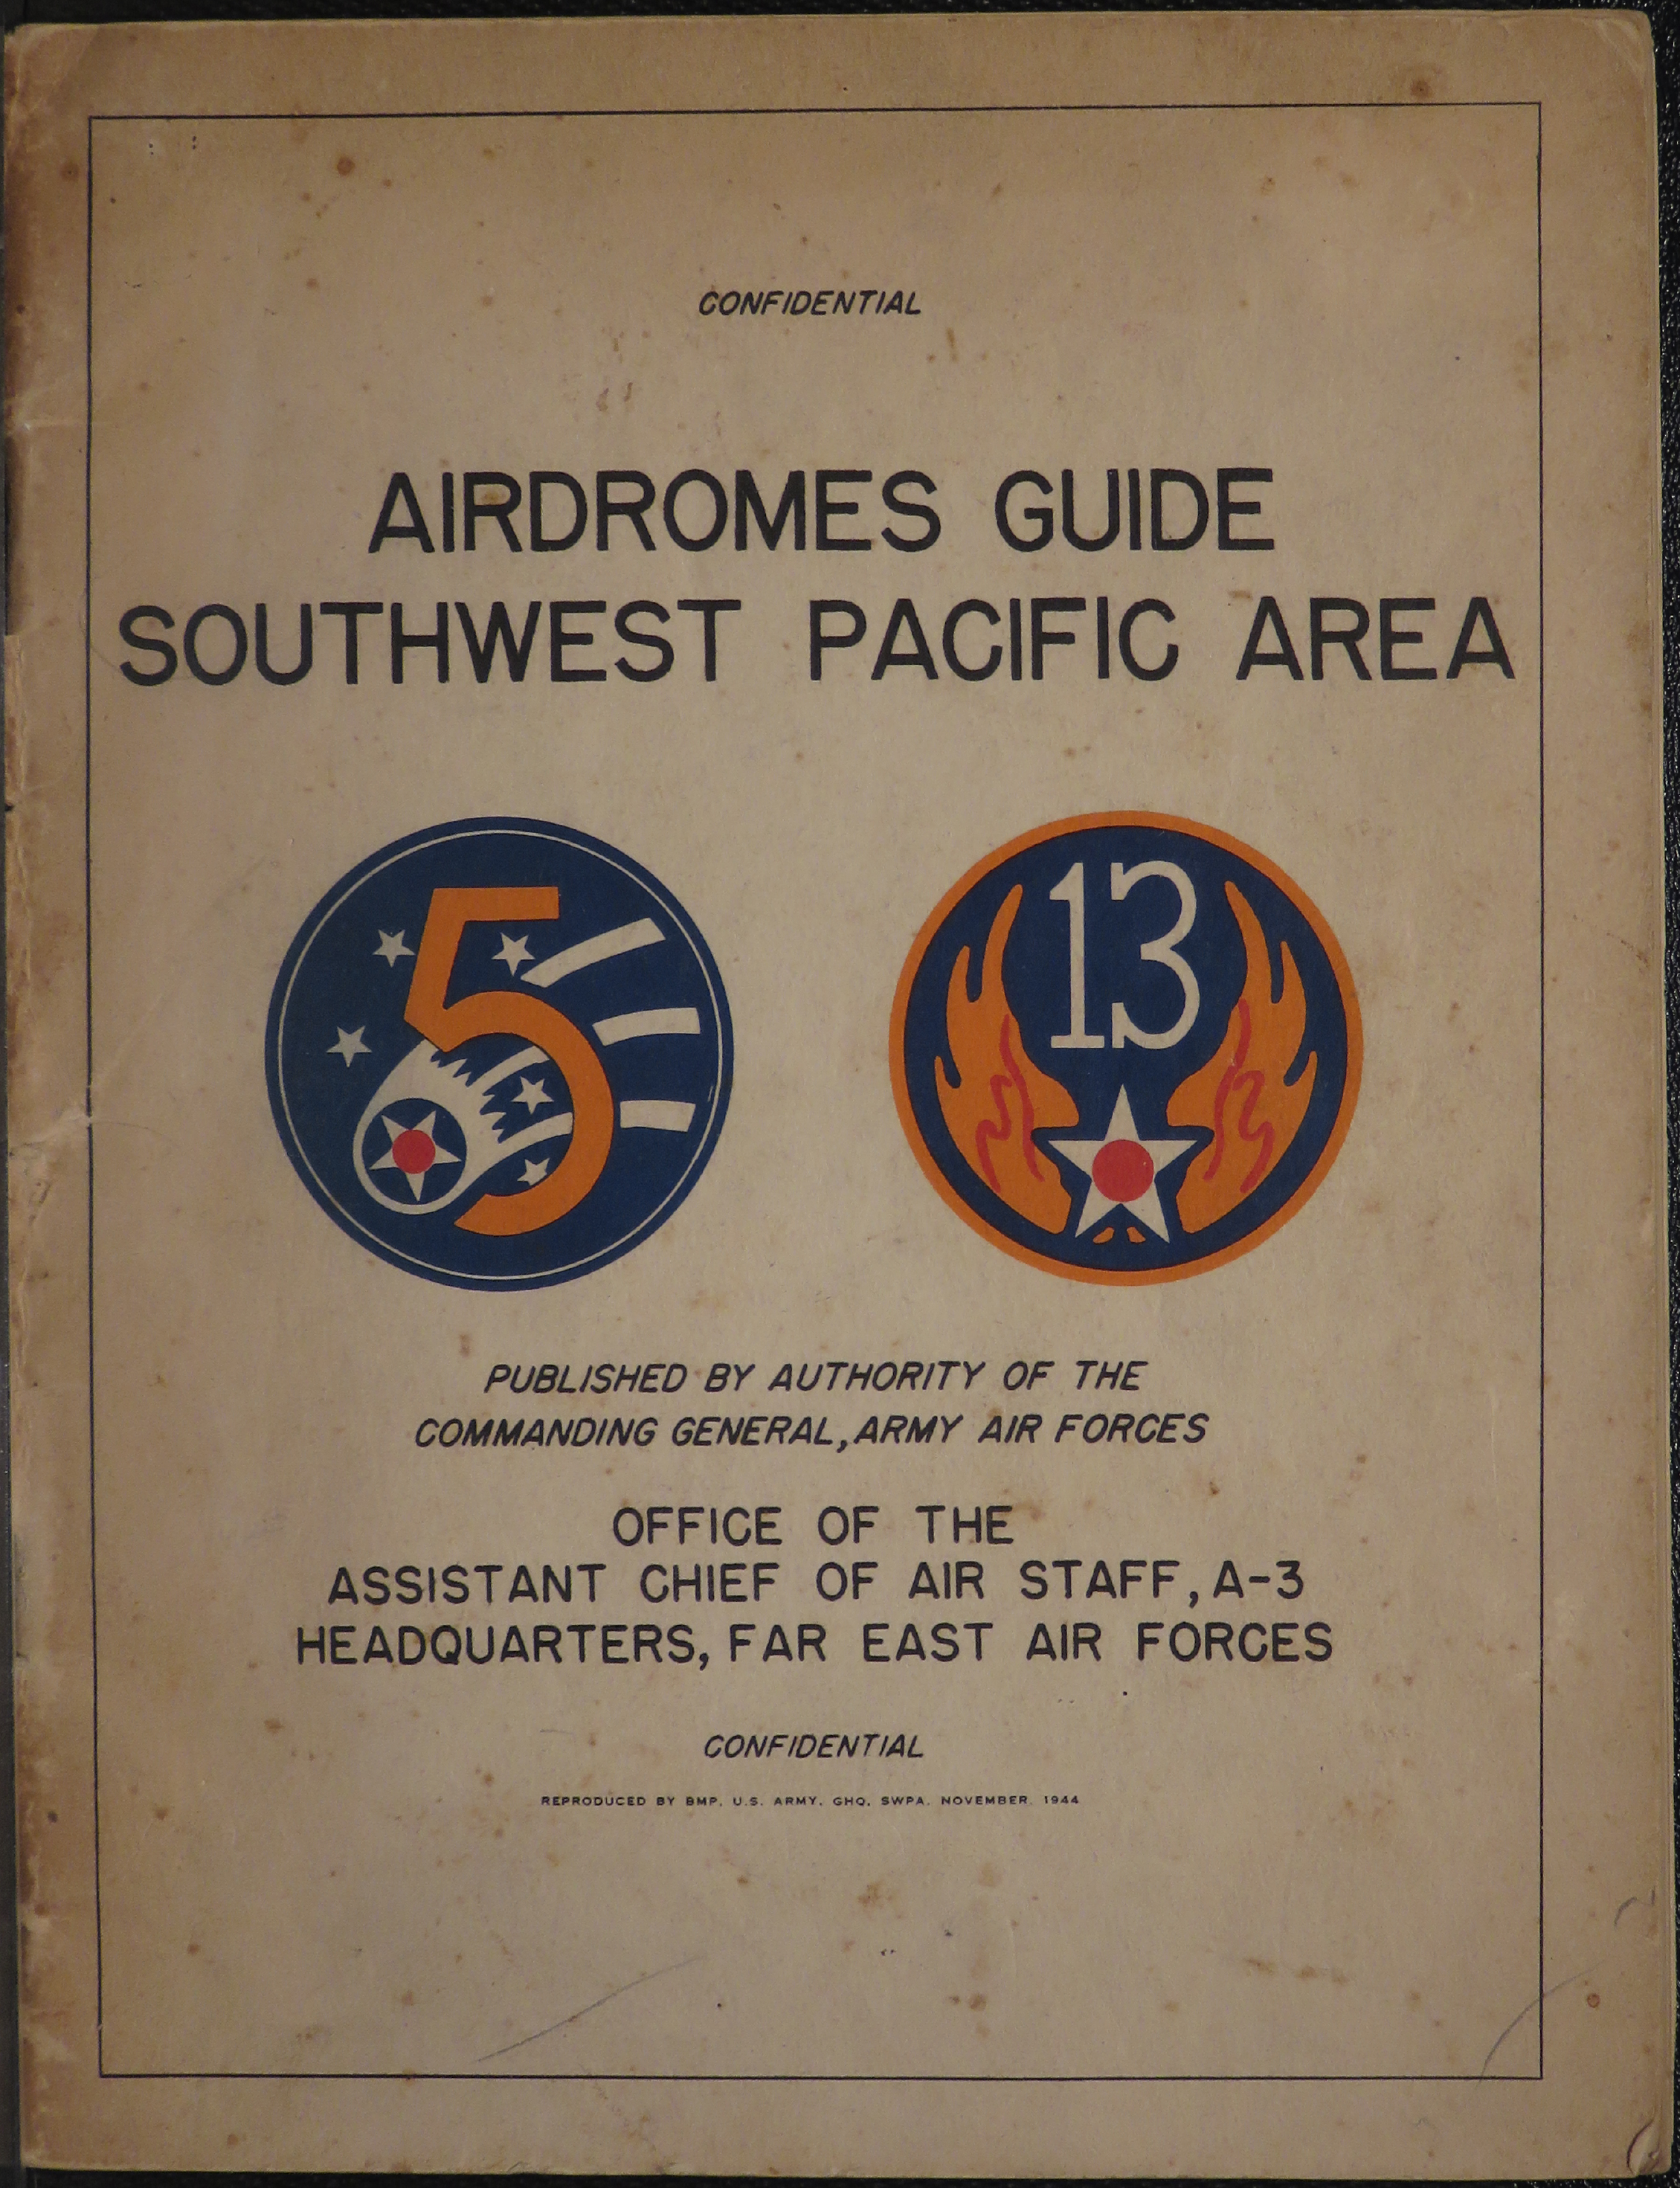 Sample page 1 from AirCorps Library document: Airdromes Guide to the Southwest Pacific Area